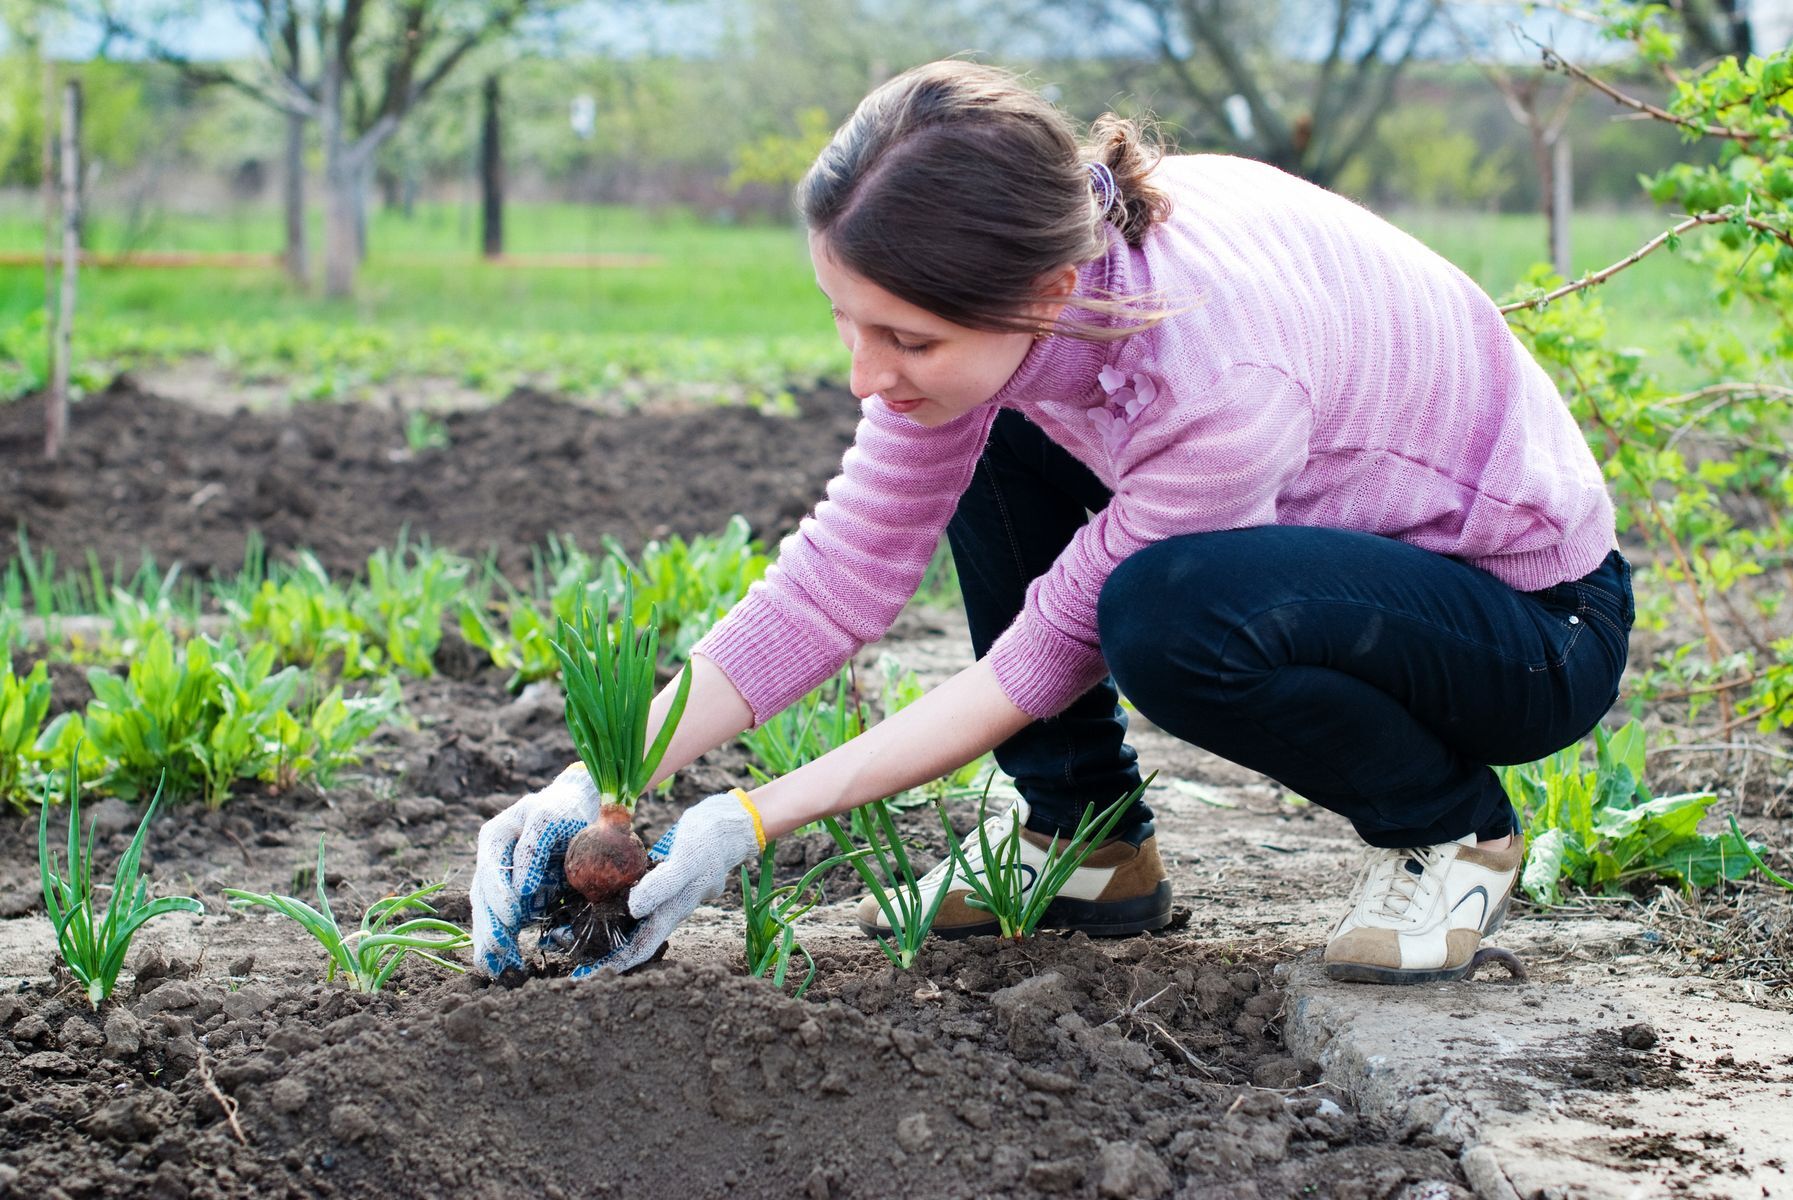 <p>In addition to helping you stay in shape, <a href="https://www.ncbi.nlm.nih.gov/pmc/articles/PMC6334070/">physically and mentally,</a> gardening provides fresh fruits and vegetables all summer long, and they won’t need to <a href="https://www.popsci.com/environment/food-transportation-carbon-emissions/">travel long distances</a> to get to your plate. What's more, you <a href="https://climate.selectra.com/en/advice/permaculture?Accept-Encoding=gzip,%20deflate&Accept=*/*&Connection=keep-alive&User-Agent=Mozilla/5.0%20(X11;%20Ubuntu;%20Linux%20x86_64;%20rv:52.0)%20Gecko/20100101%20Firefox/52.0">control how your garden grows</a> and can choose ecological cultivation methods. Tip: Before purchasing seeds, research exchange groups that could save you money. In fact, <a href="https://laidbackgardener.blog/2020/01/25/national-seed-swap-day/?doing_wp_cron=1668298049.9570729732513427734375">January 25</a> is dedicated to swapping seeds.</p>